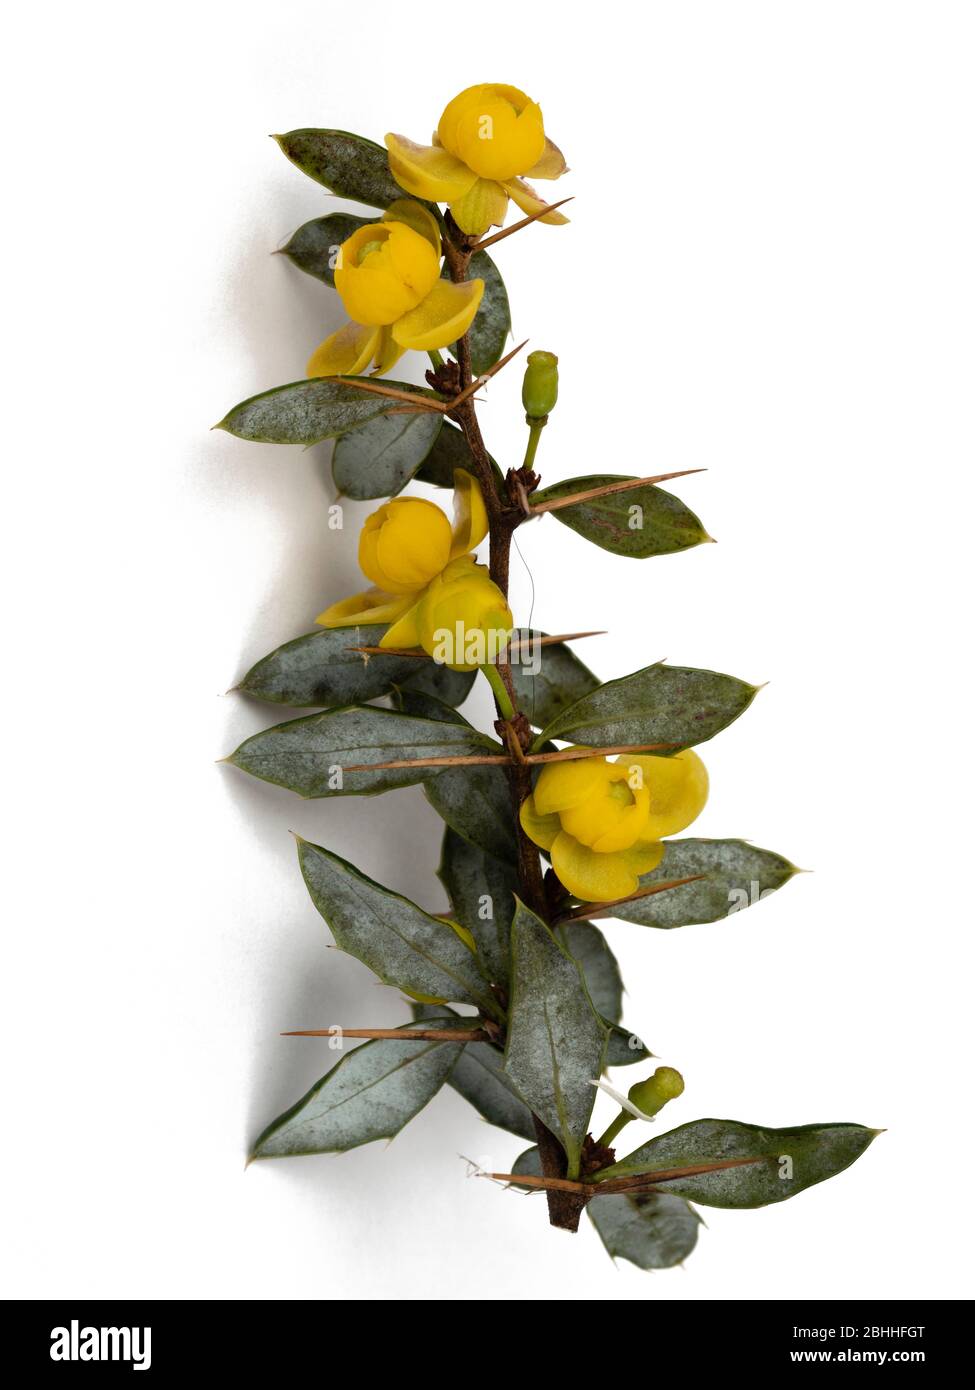 Isolated flowering branch of the warty barberry, Berberis verruculosa, a hardy evergreen shrub on a white background Stock Photo